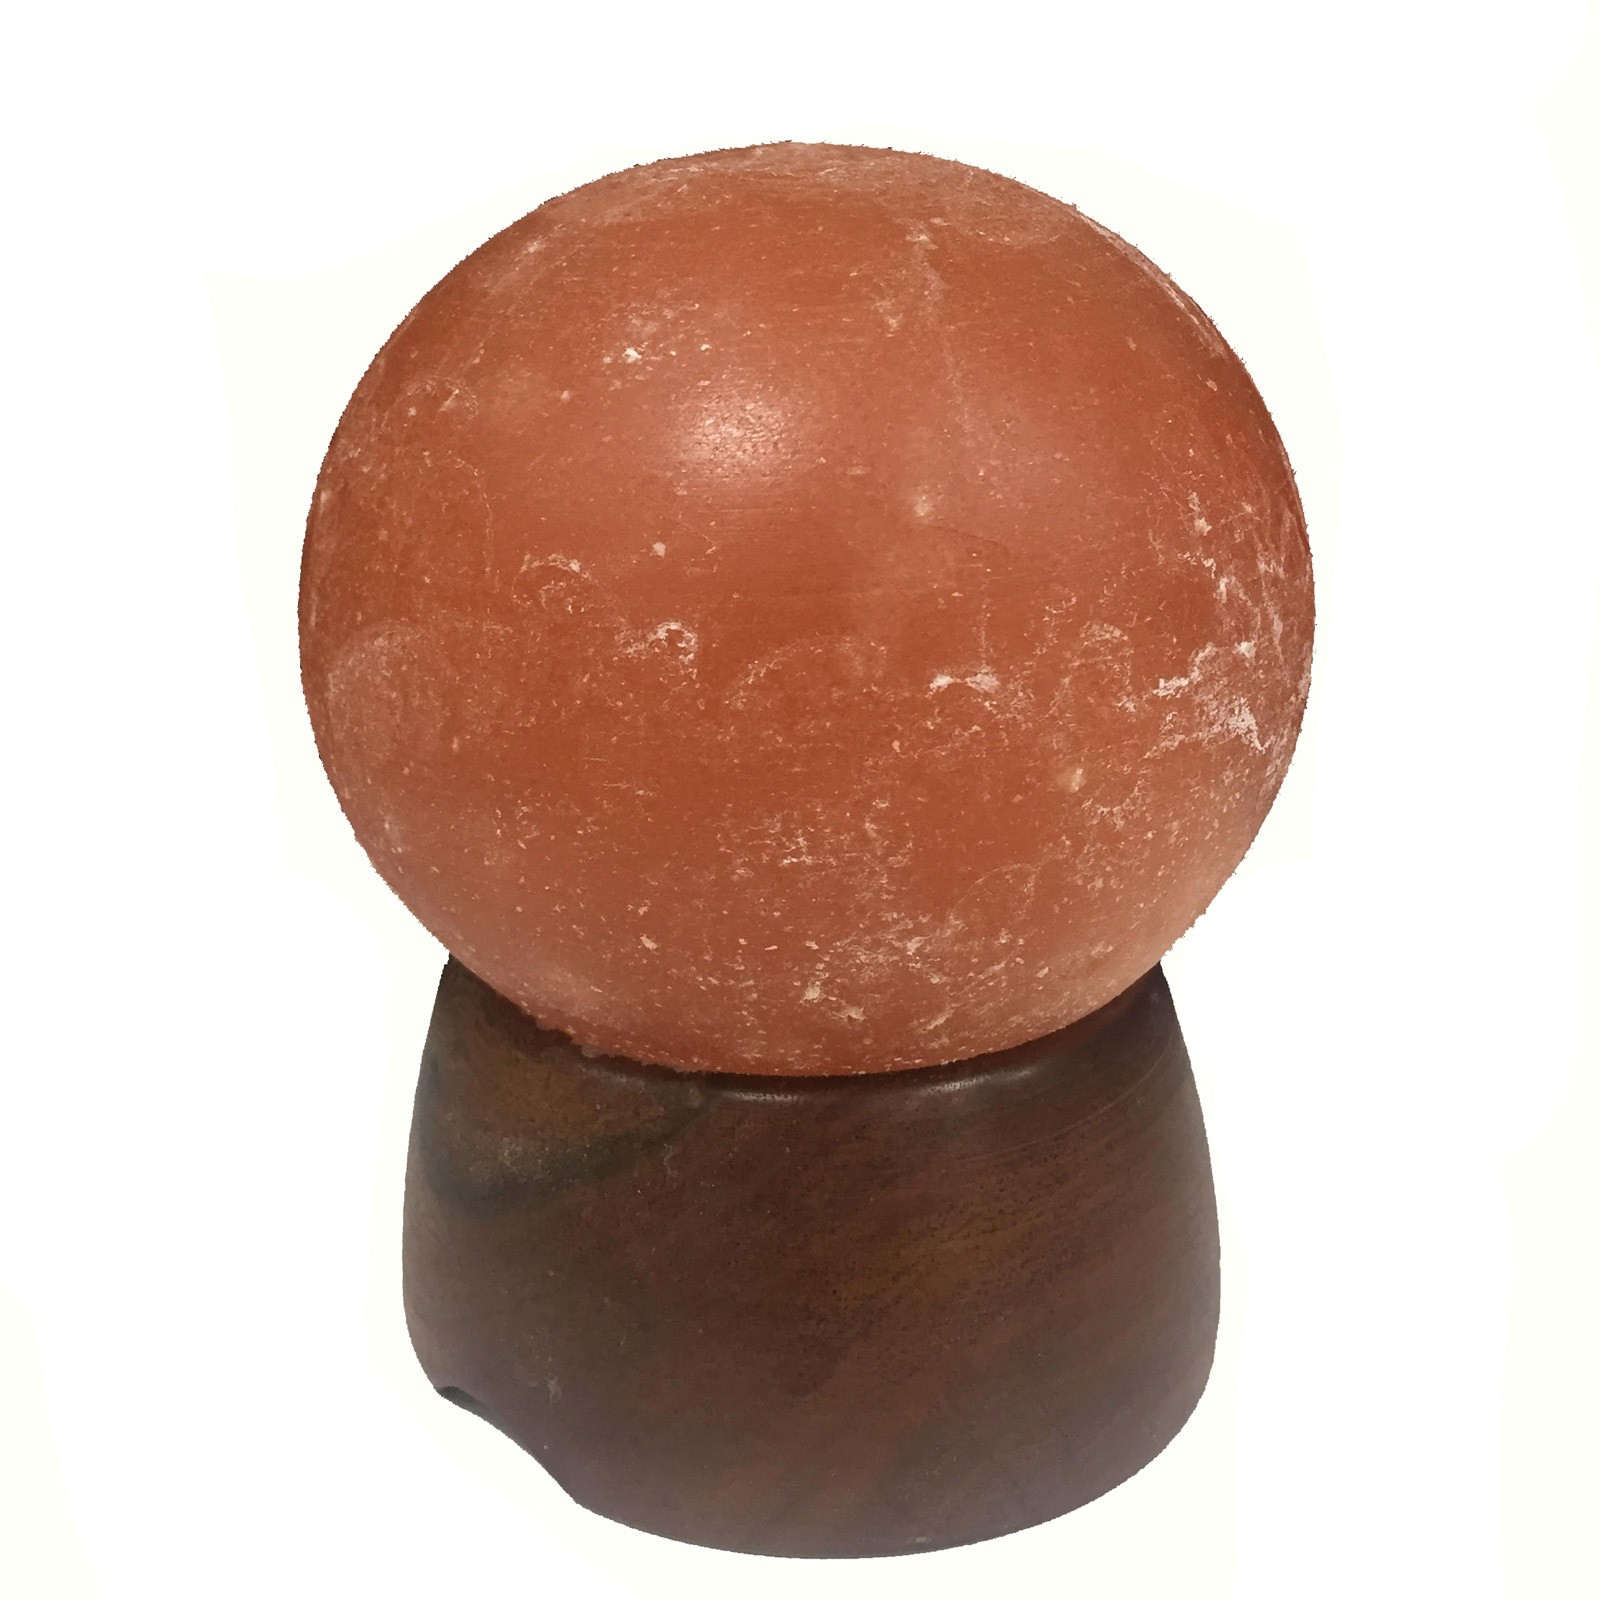 Salt Lamp Ball with Wood Base appx 1.5 - 1.8kg